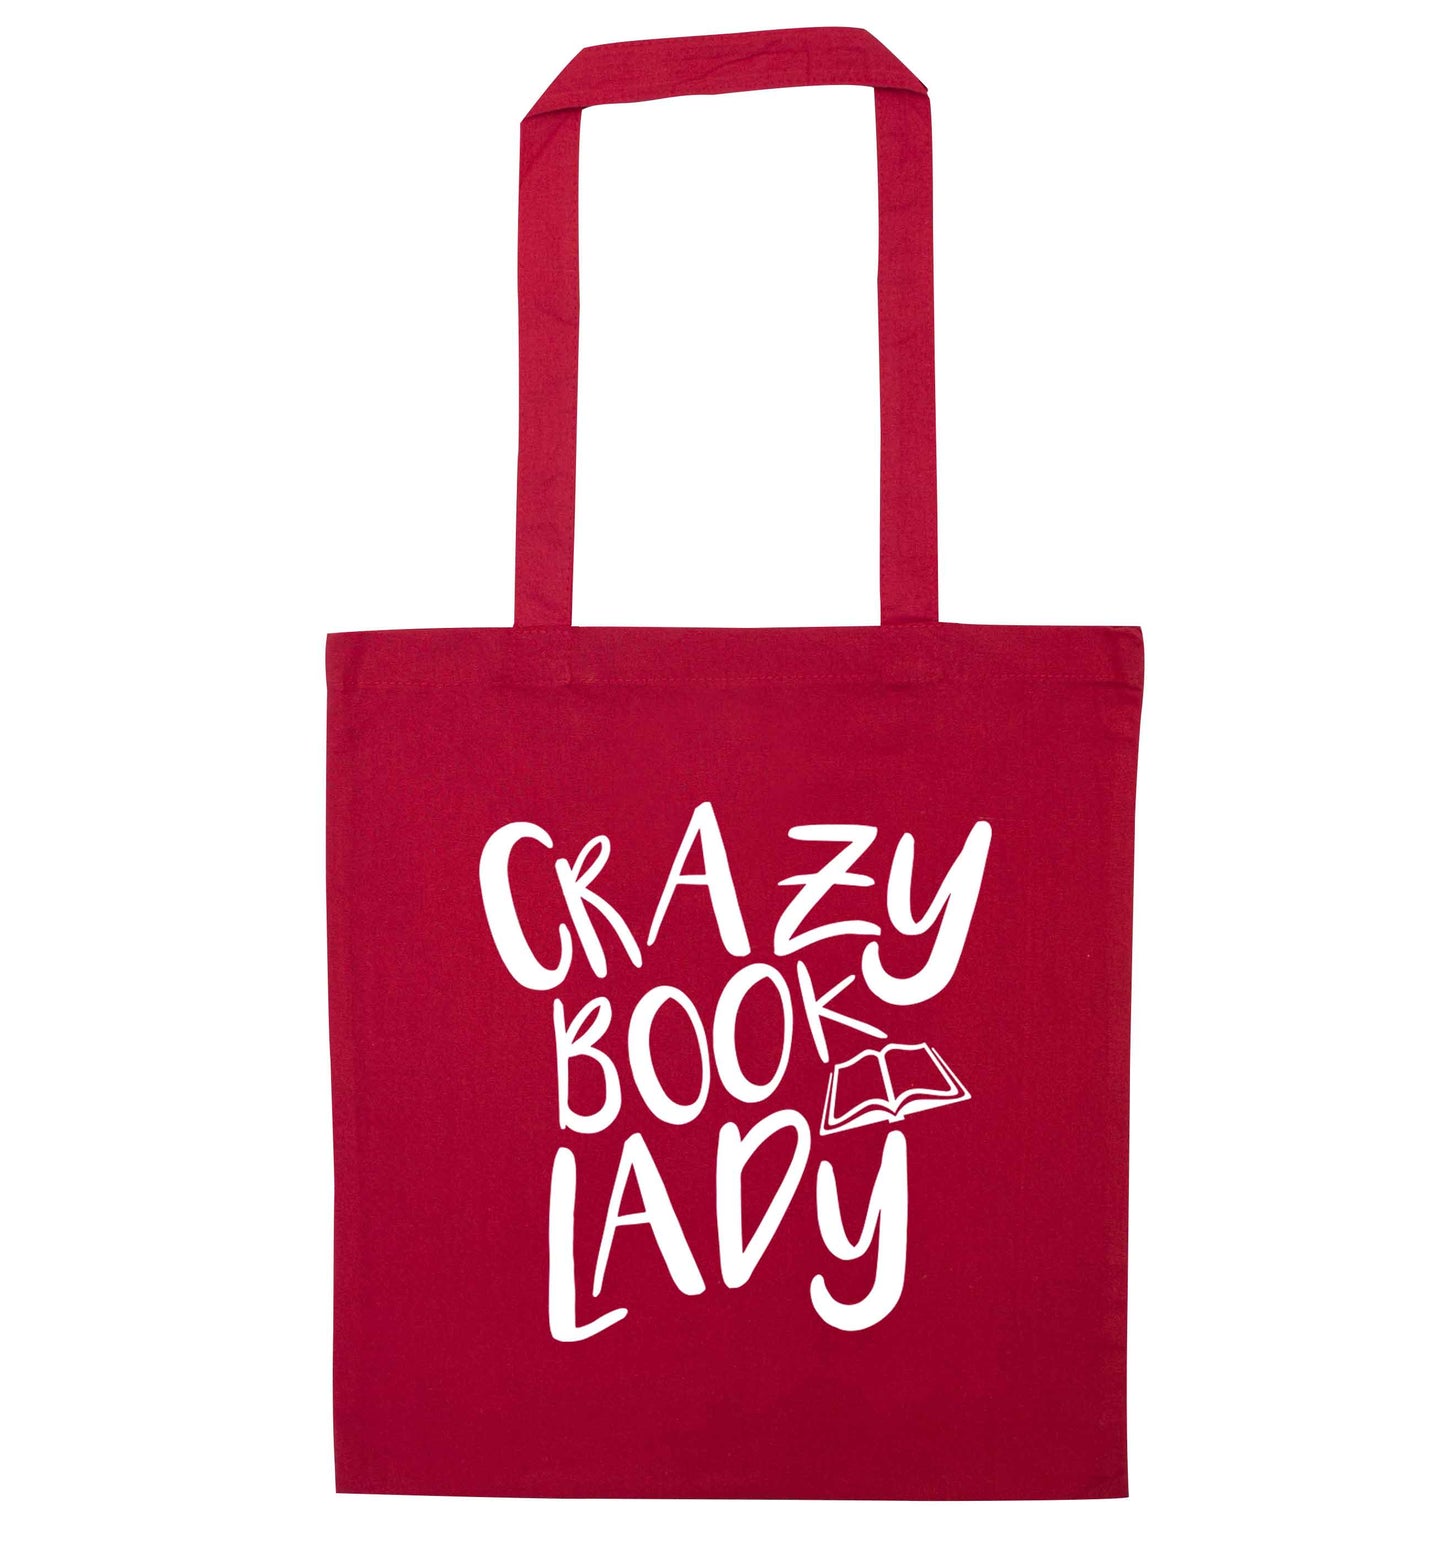 Crazy book lady red tote bag